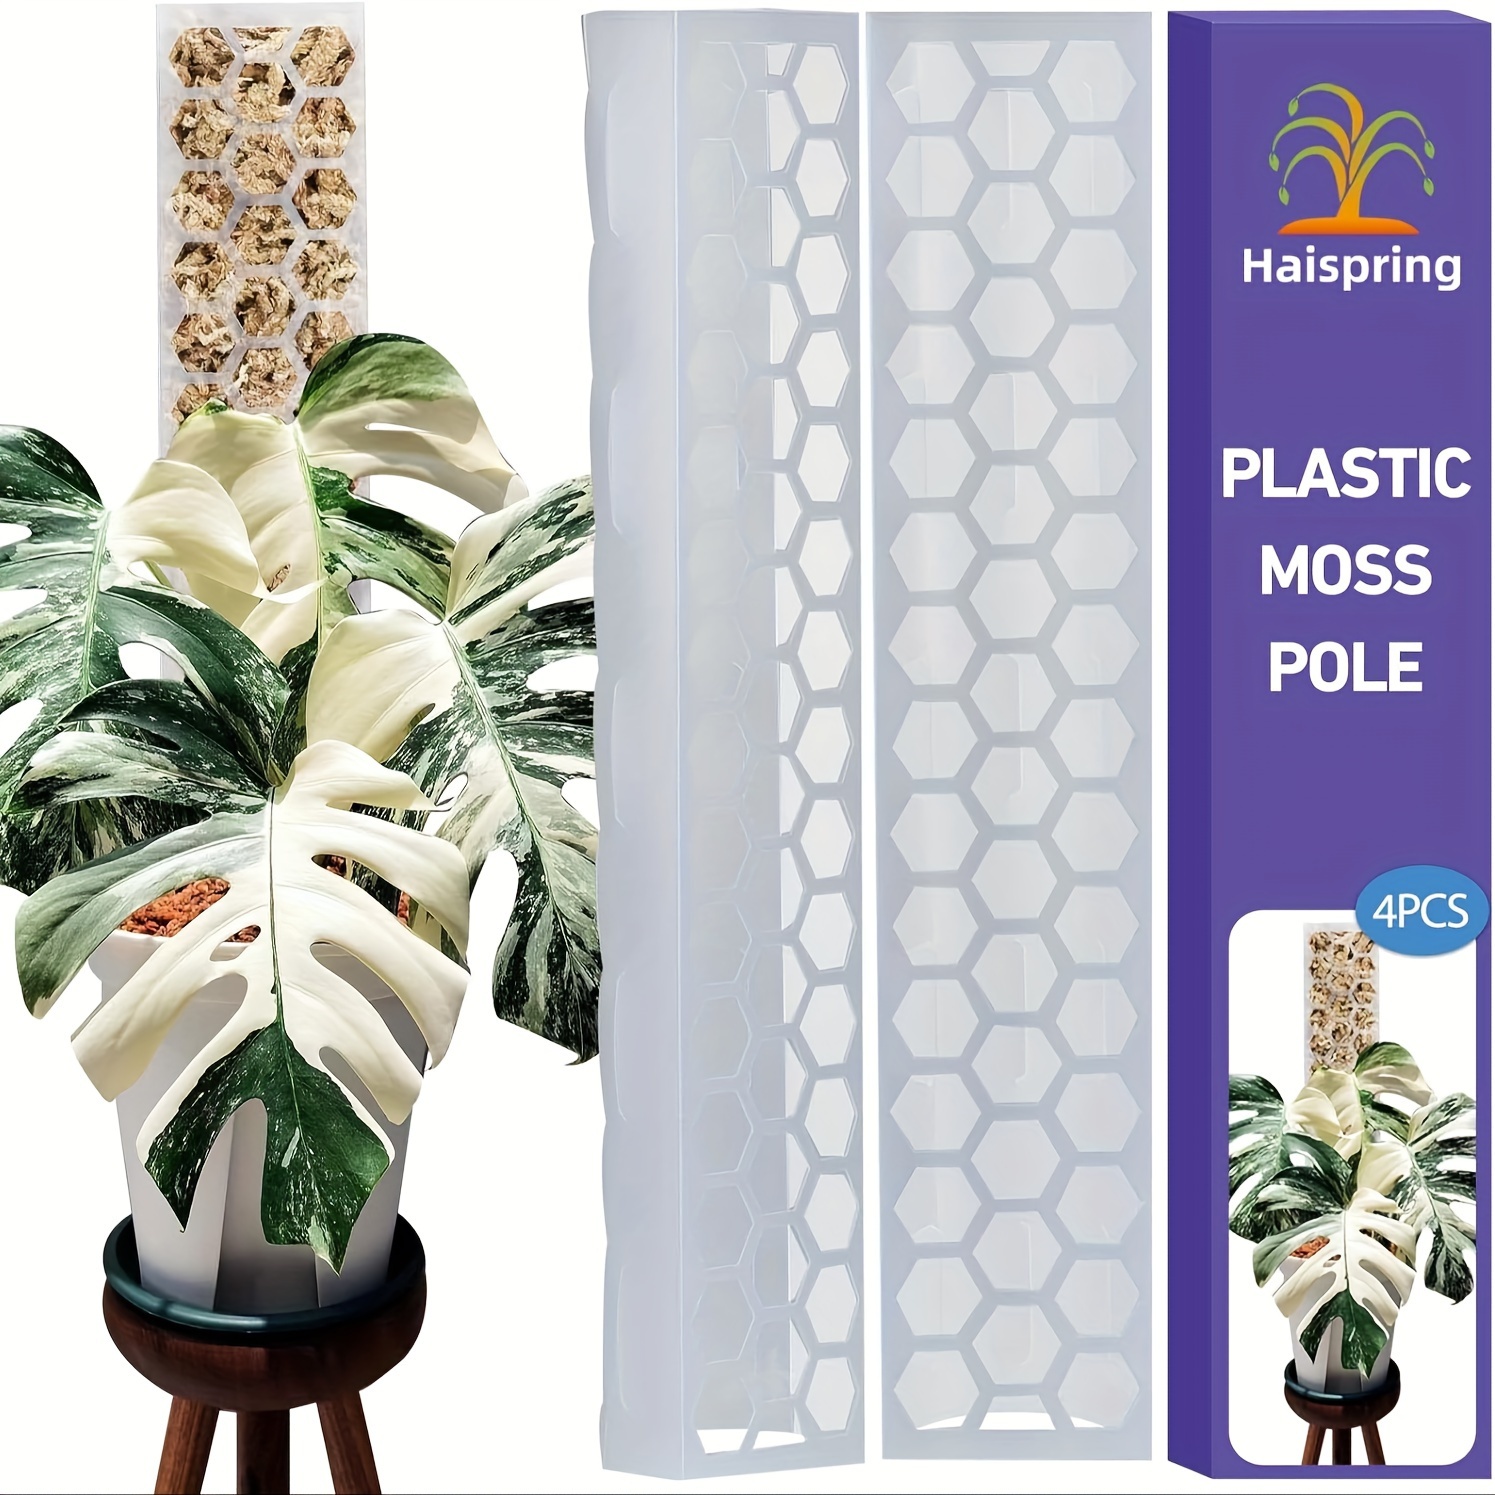 

Plastic Moss Pole 4 Pcs Plant Stakes Extending To 62 Inch For Training Indoor Climbing Plants Such As Monstera To Grow Upwards-use Plant Support Poles Work With Sphagnum Moss Or Other